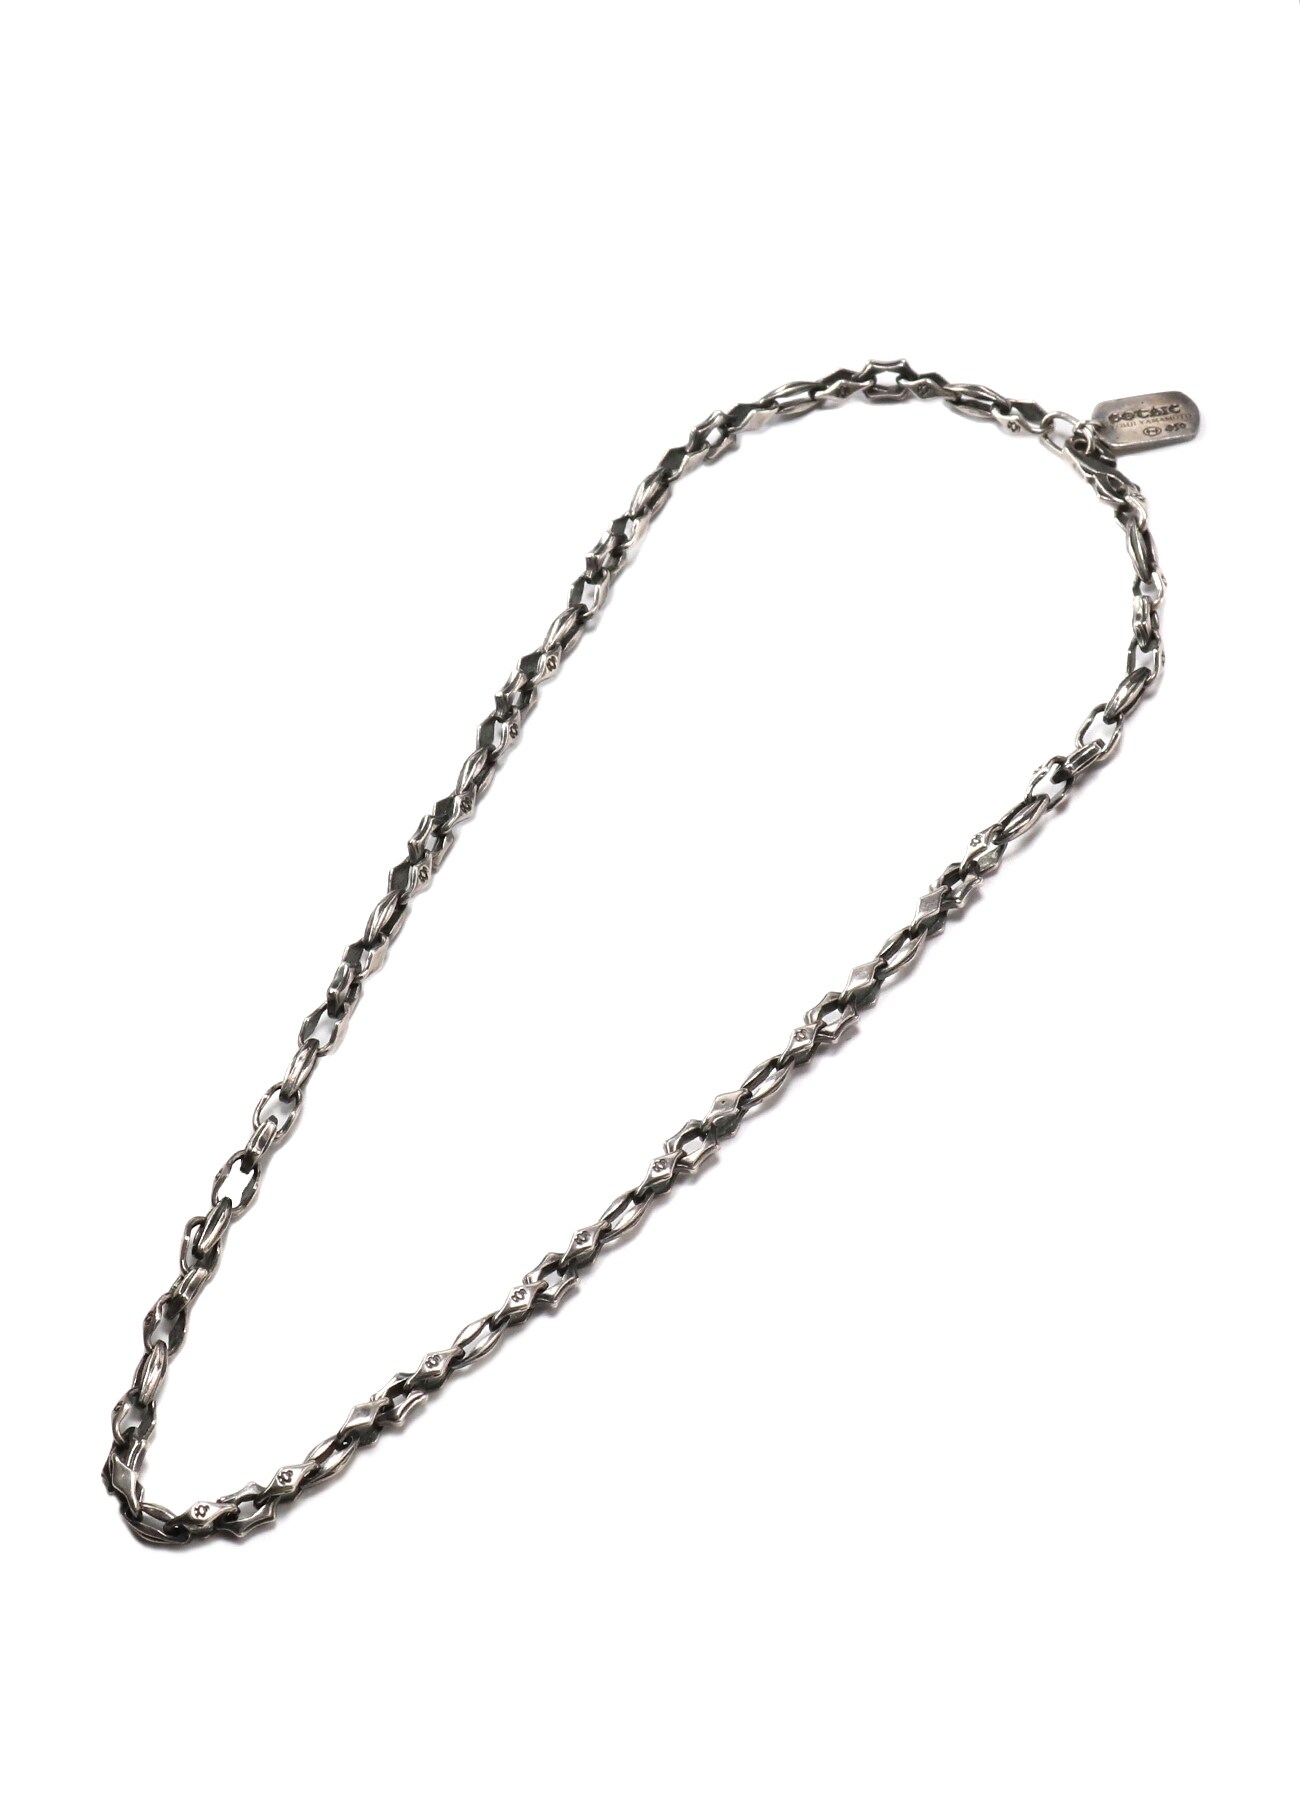 SILVER 950 GOTHIC CHAIN NECKLACE 45CM